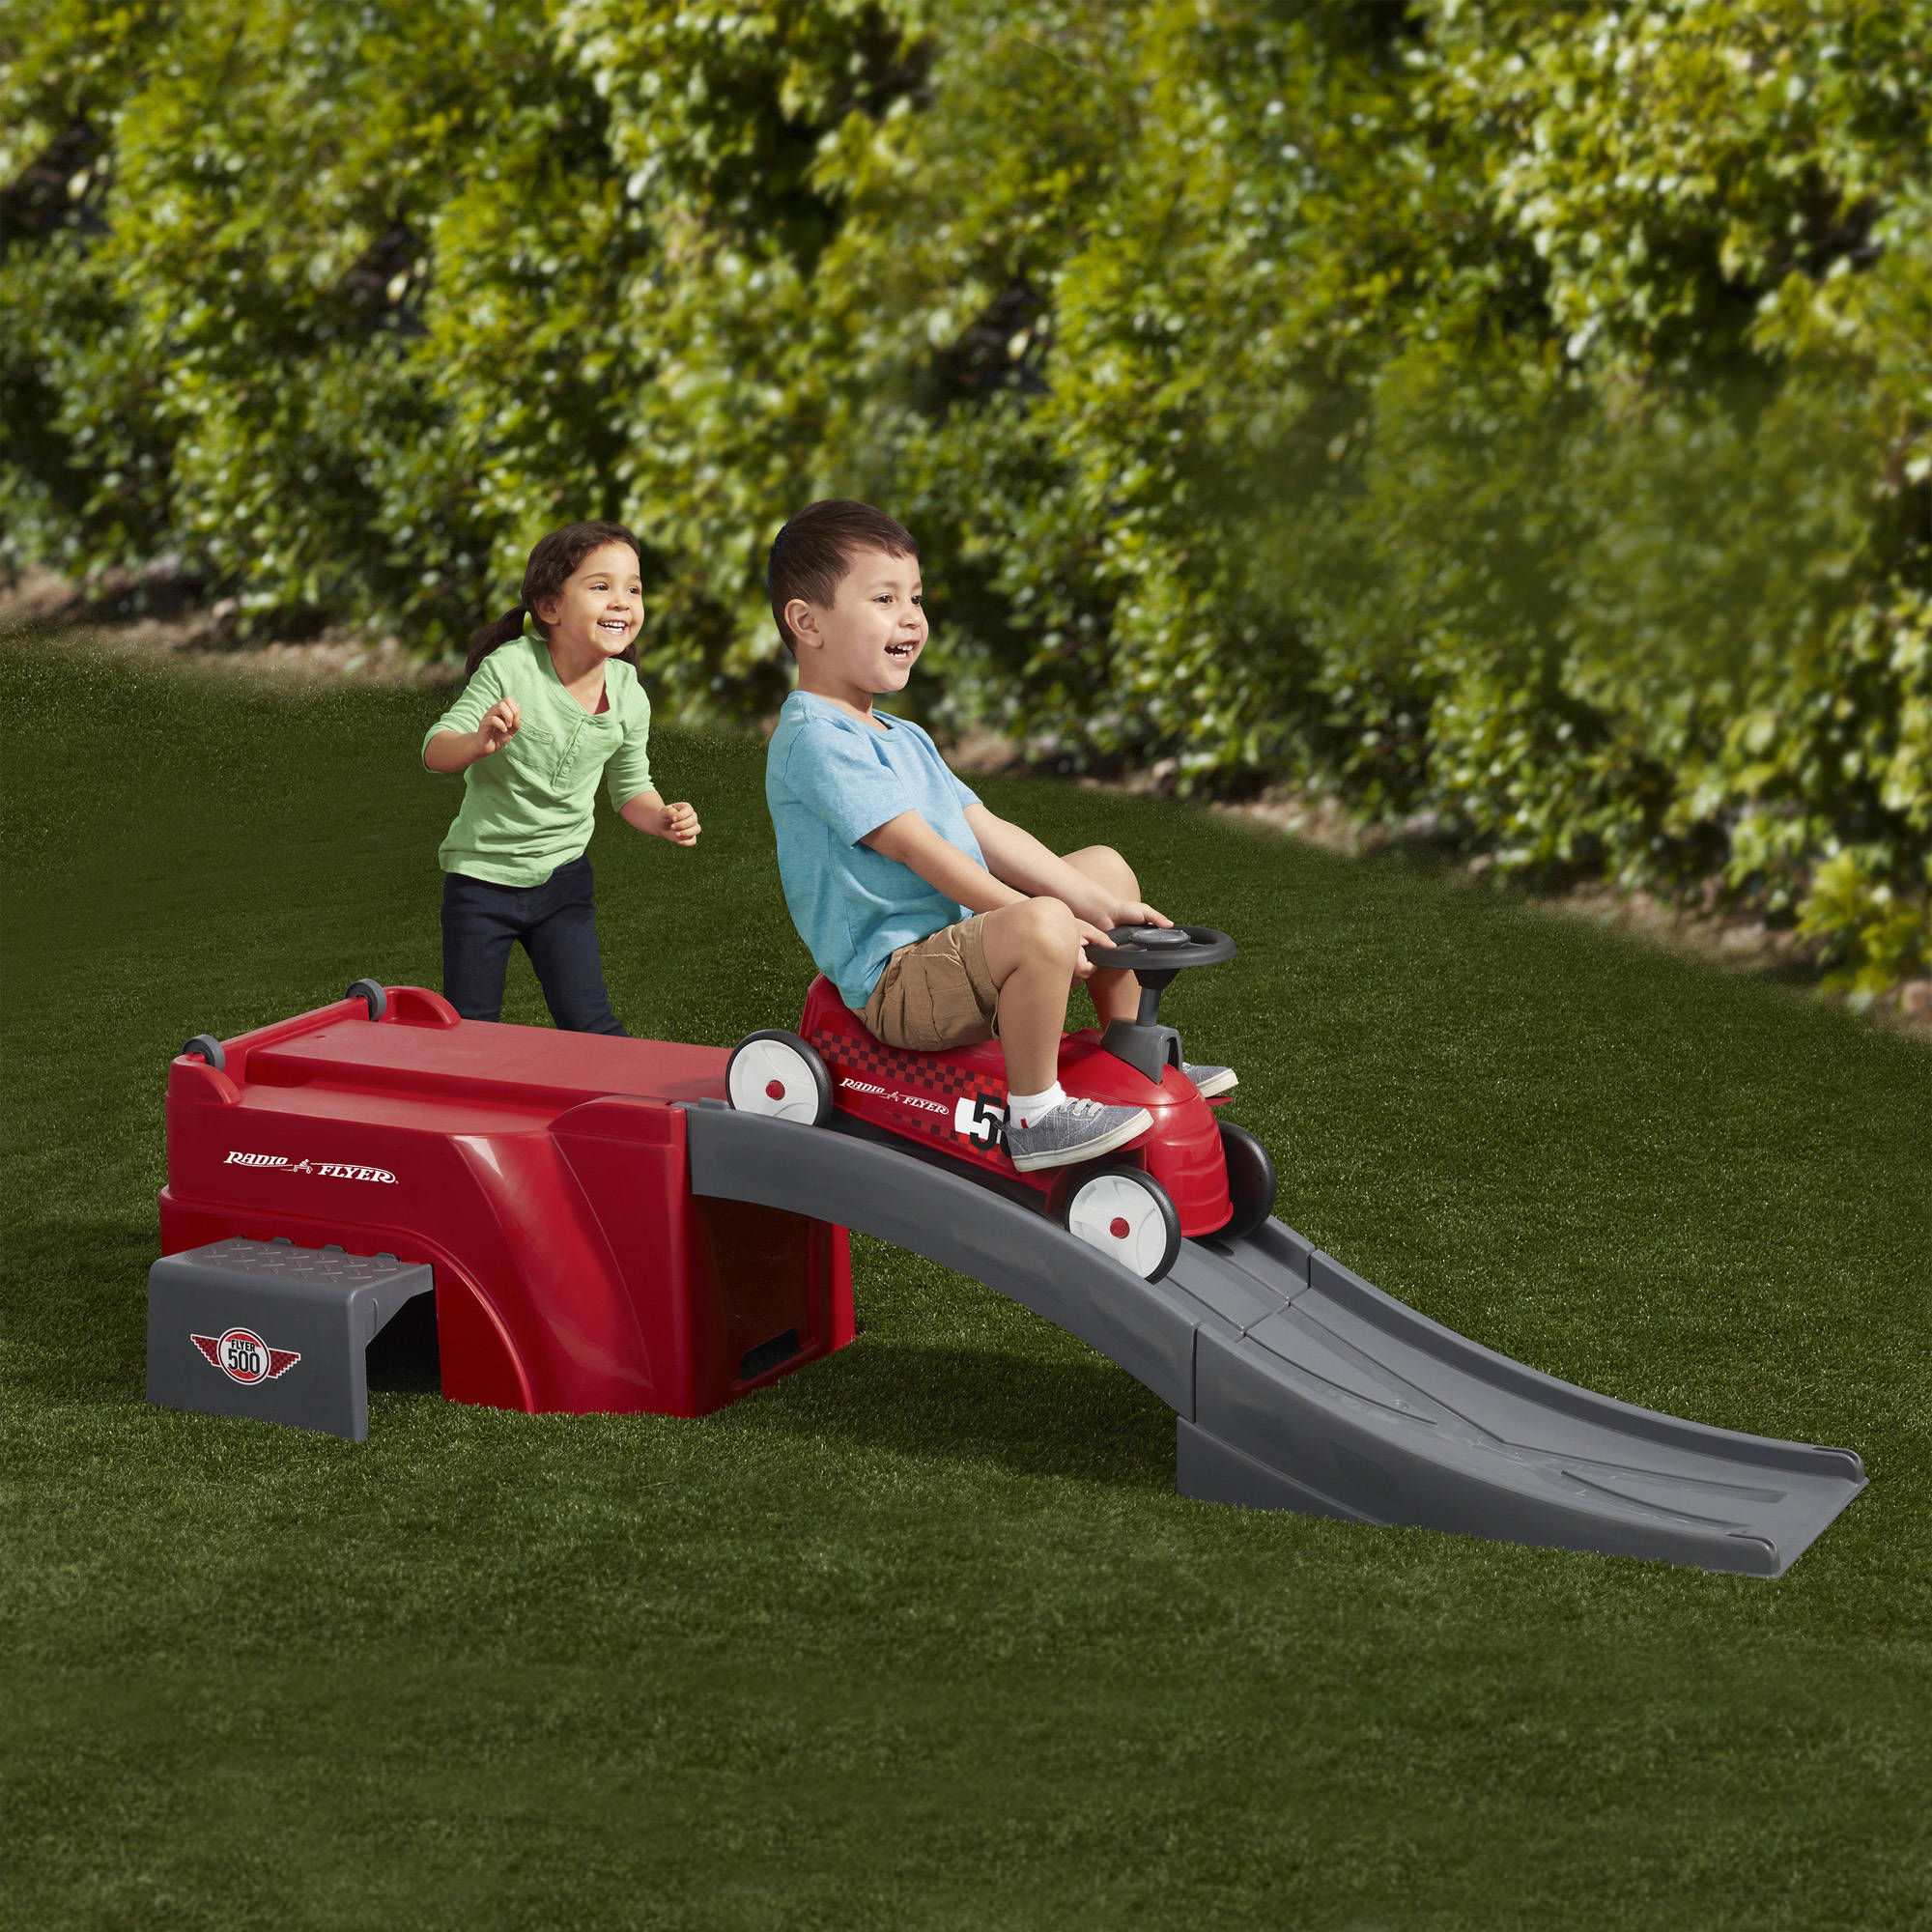 Radio Flyer, Flyer 500 Ride-on with Ramp and Car, Red - image 2 of 8